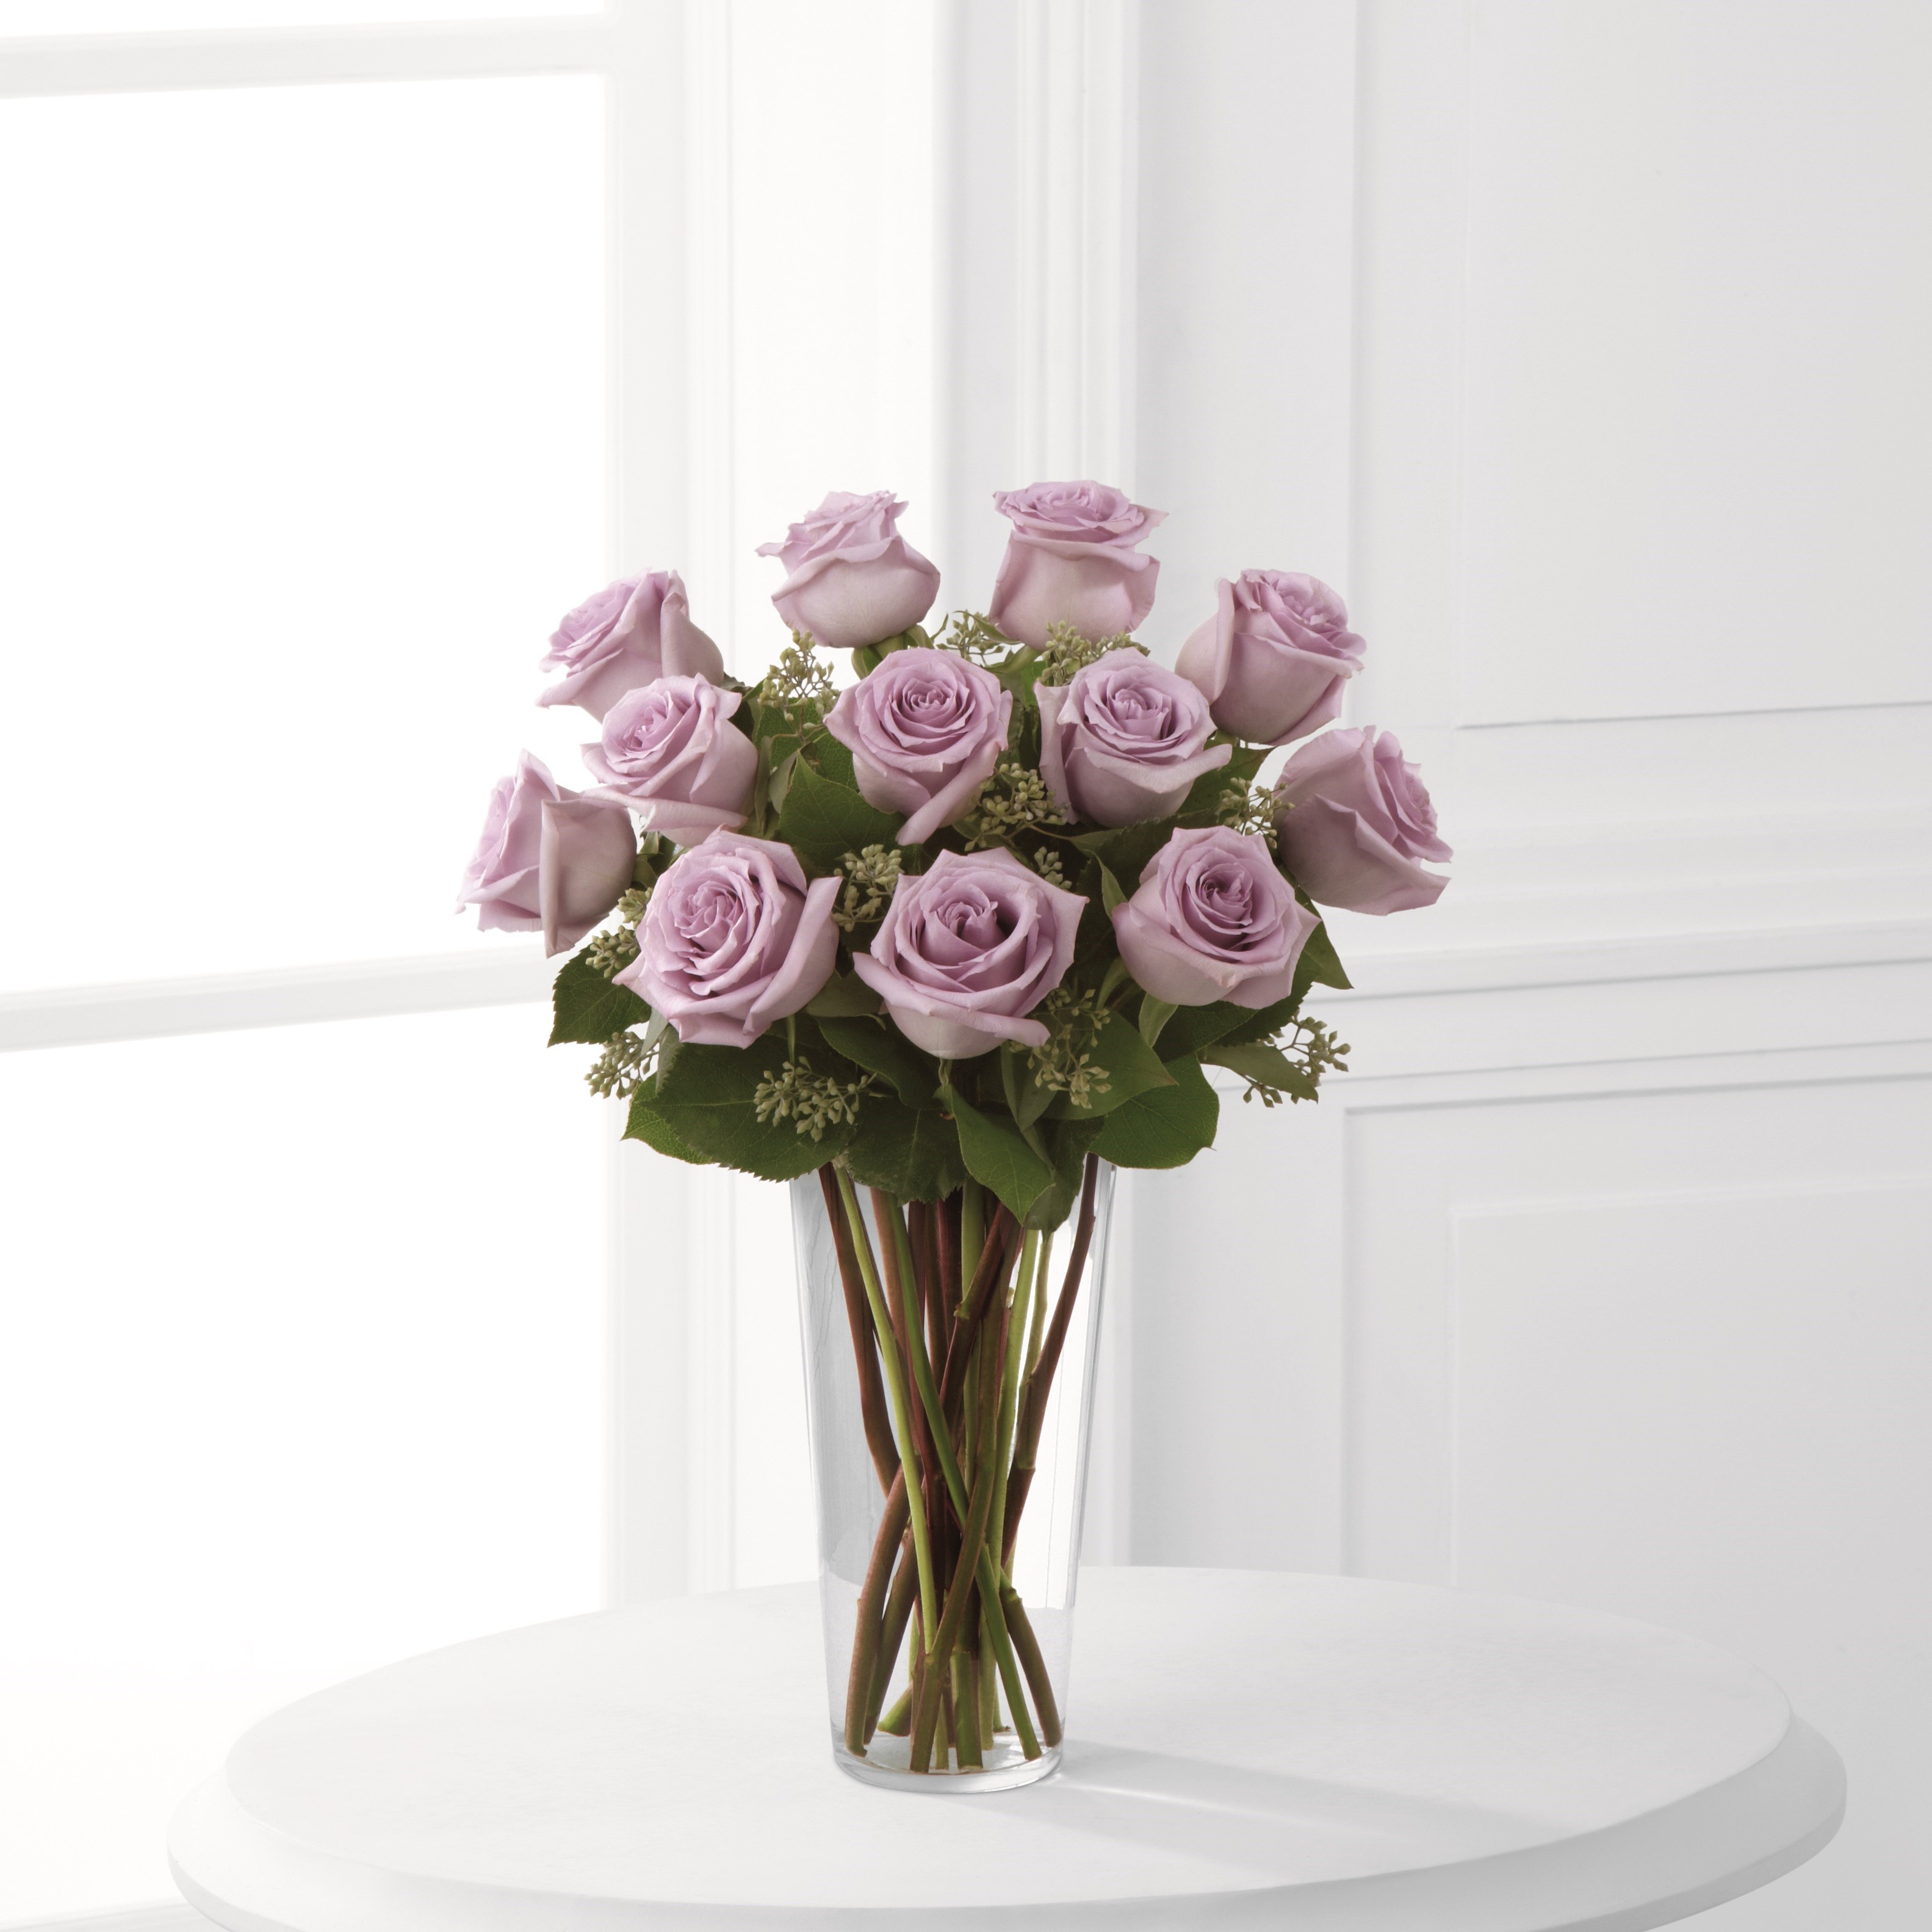 The FTD Lavender Rose Bouquet Deluxe